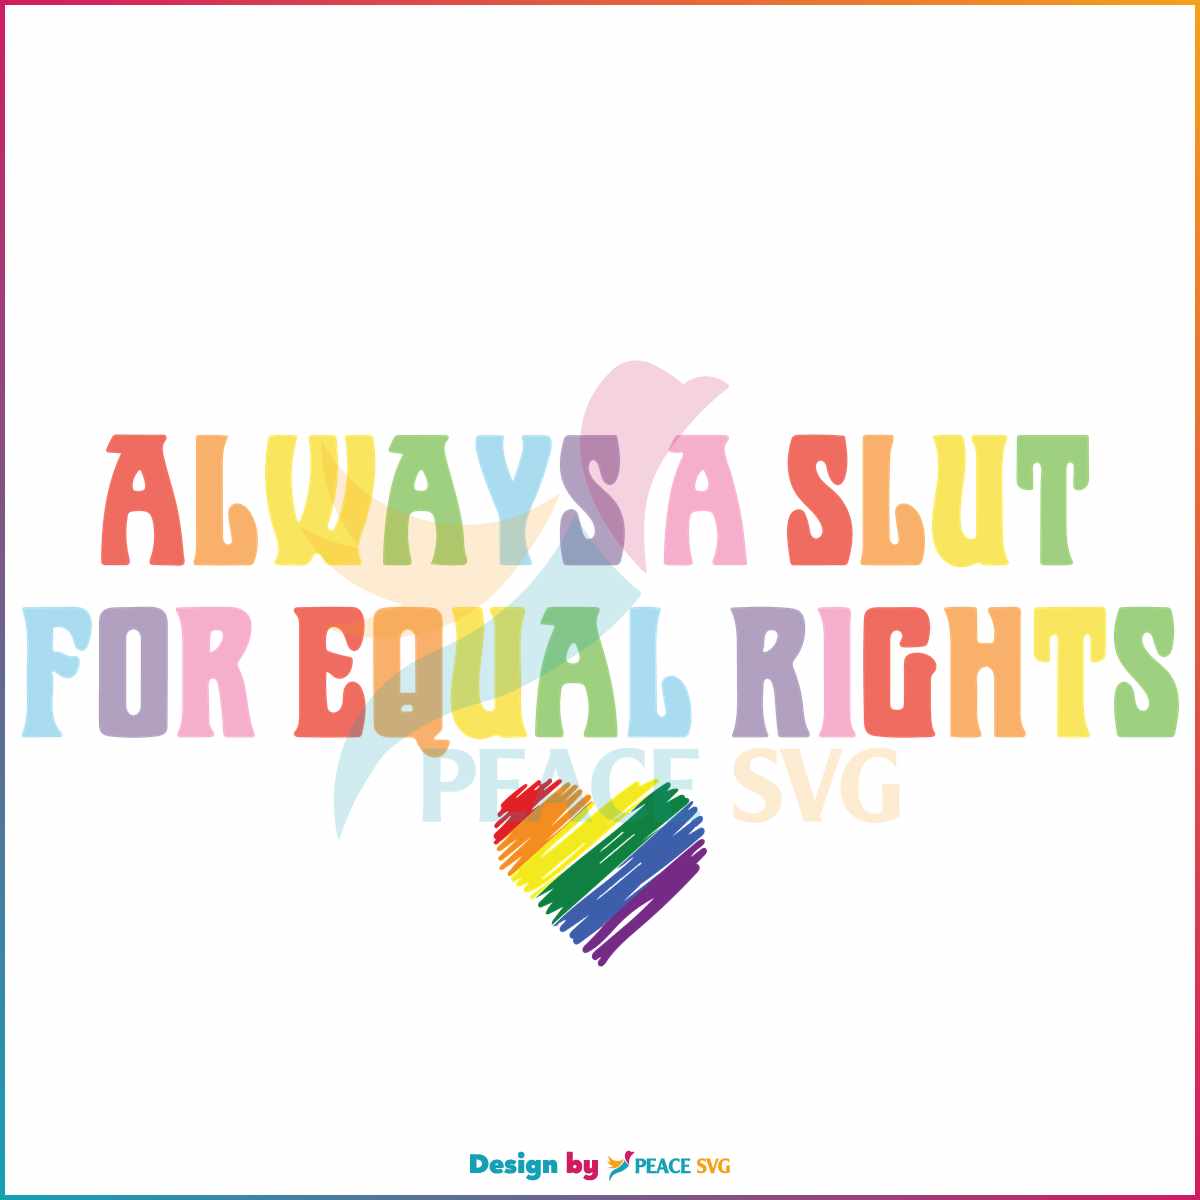 always-a-slut-for-equal-rights-equality-matter-svg-cutting-file